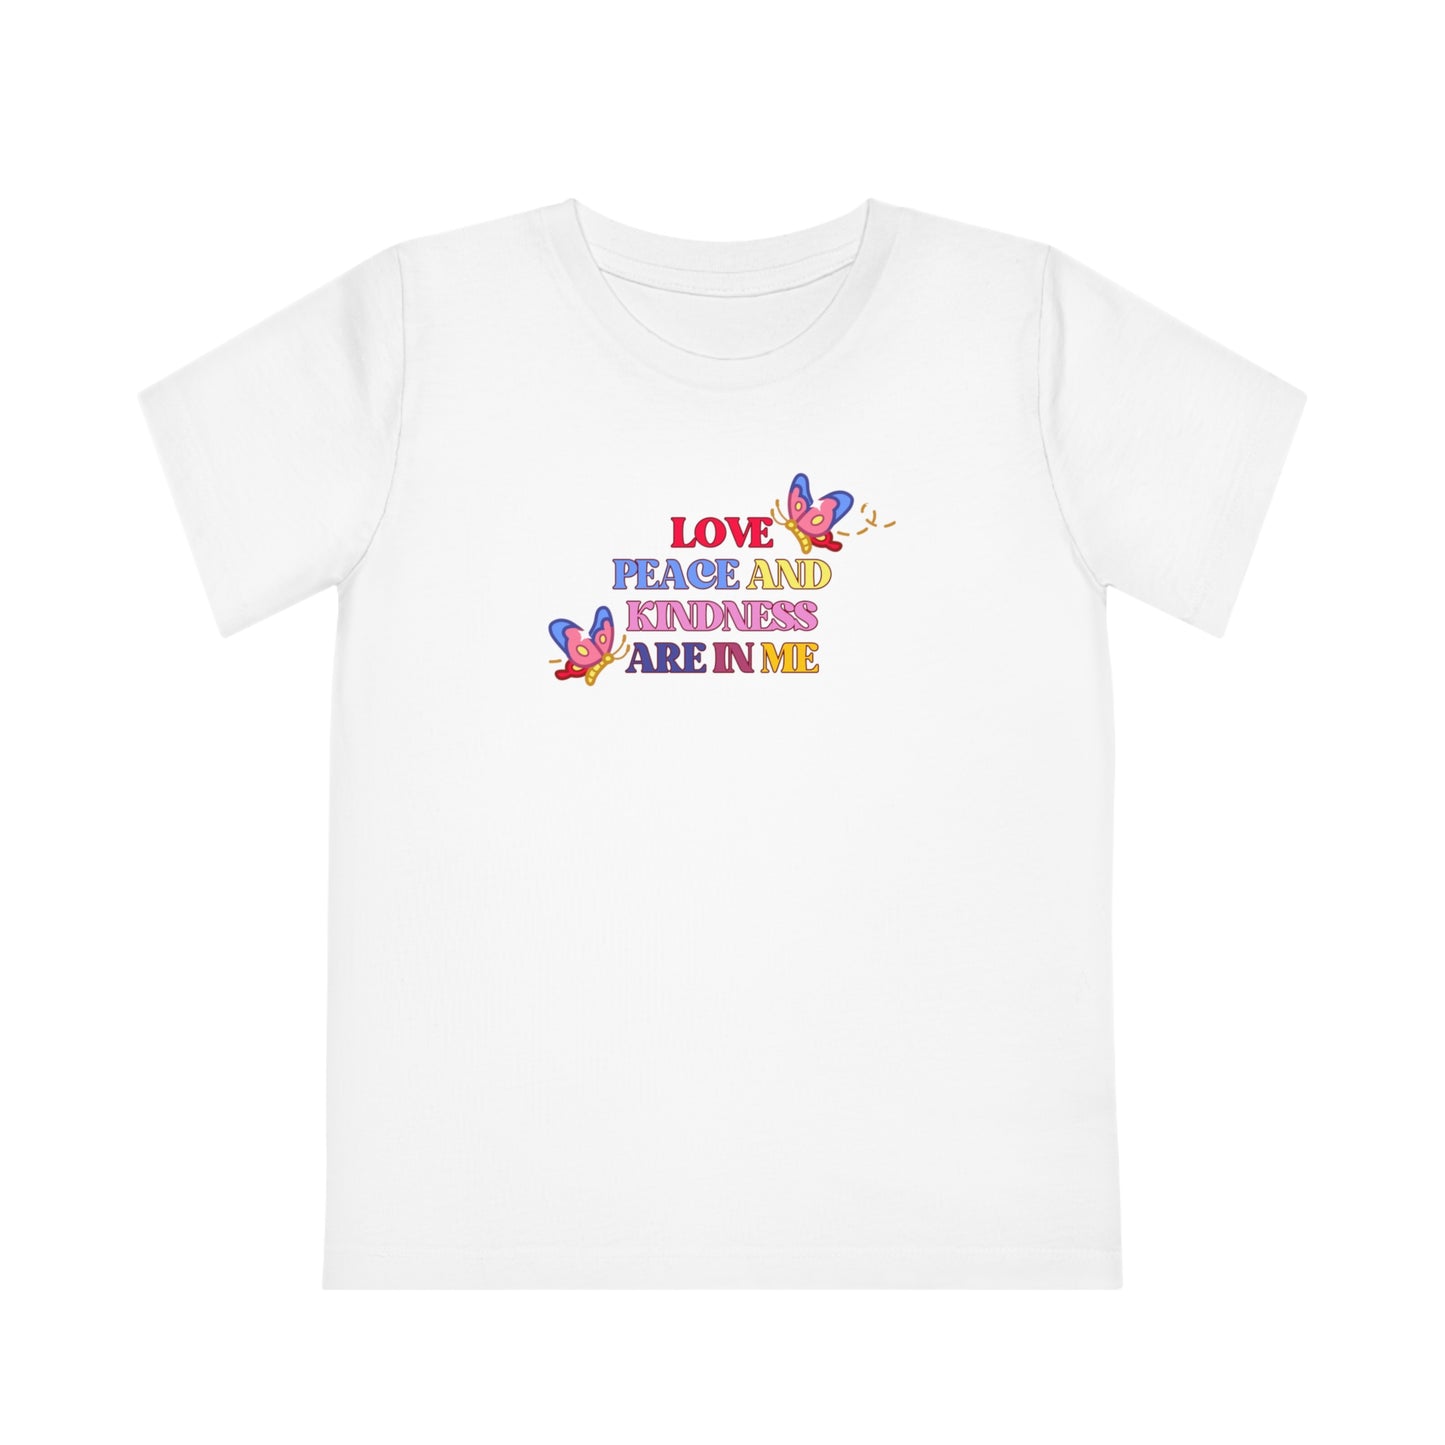 Christian Shirts for Kids, Children's Eco-friendly Christian T-shirt, Kids Natural Faith T-shirt, Toddler & Youth Faith Tee, Love Peace and Kindness Tee